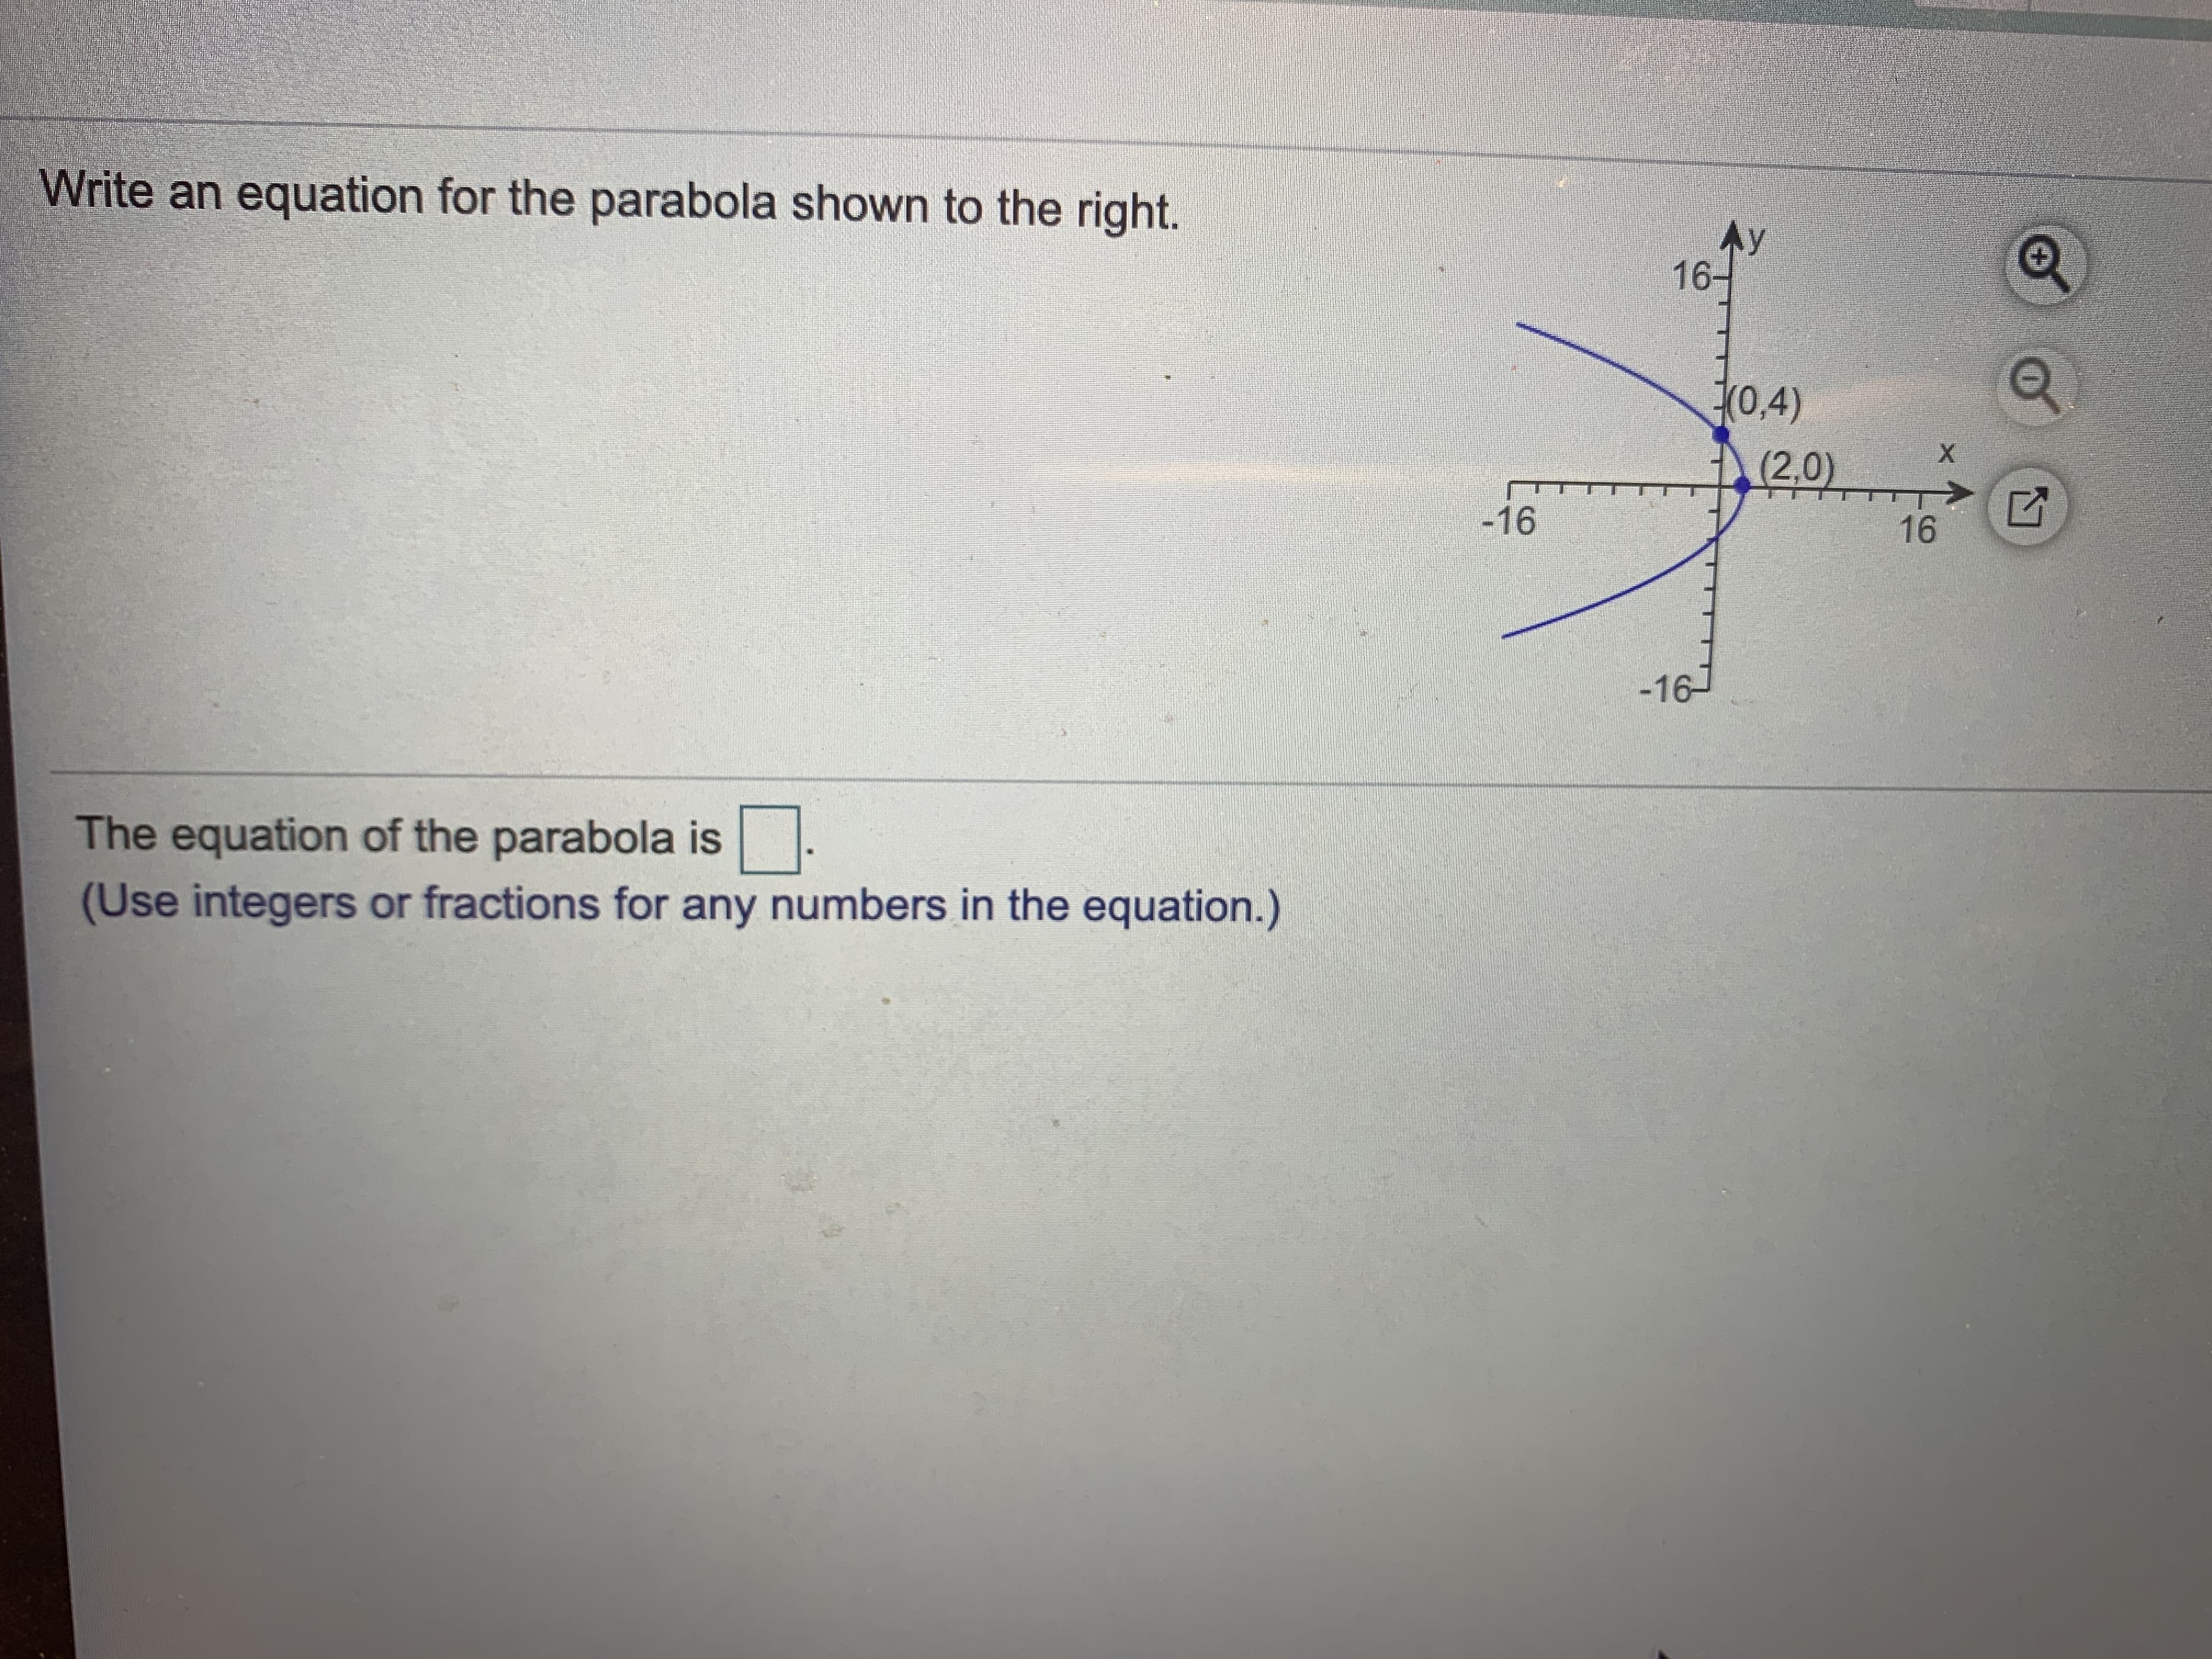 Write an equation for the parabola shown to the right.
